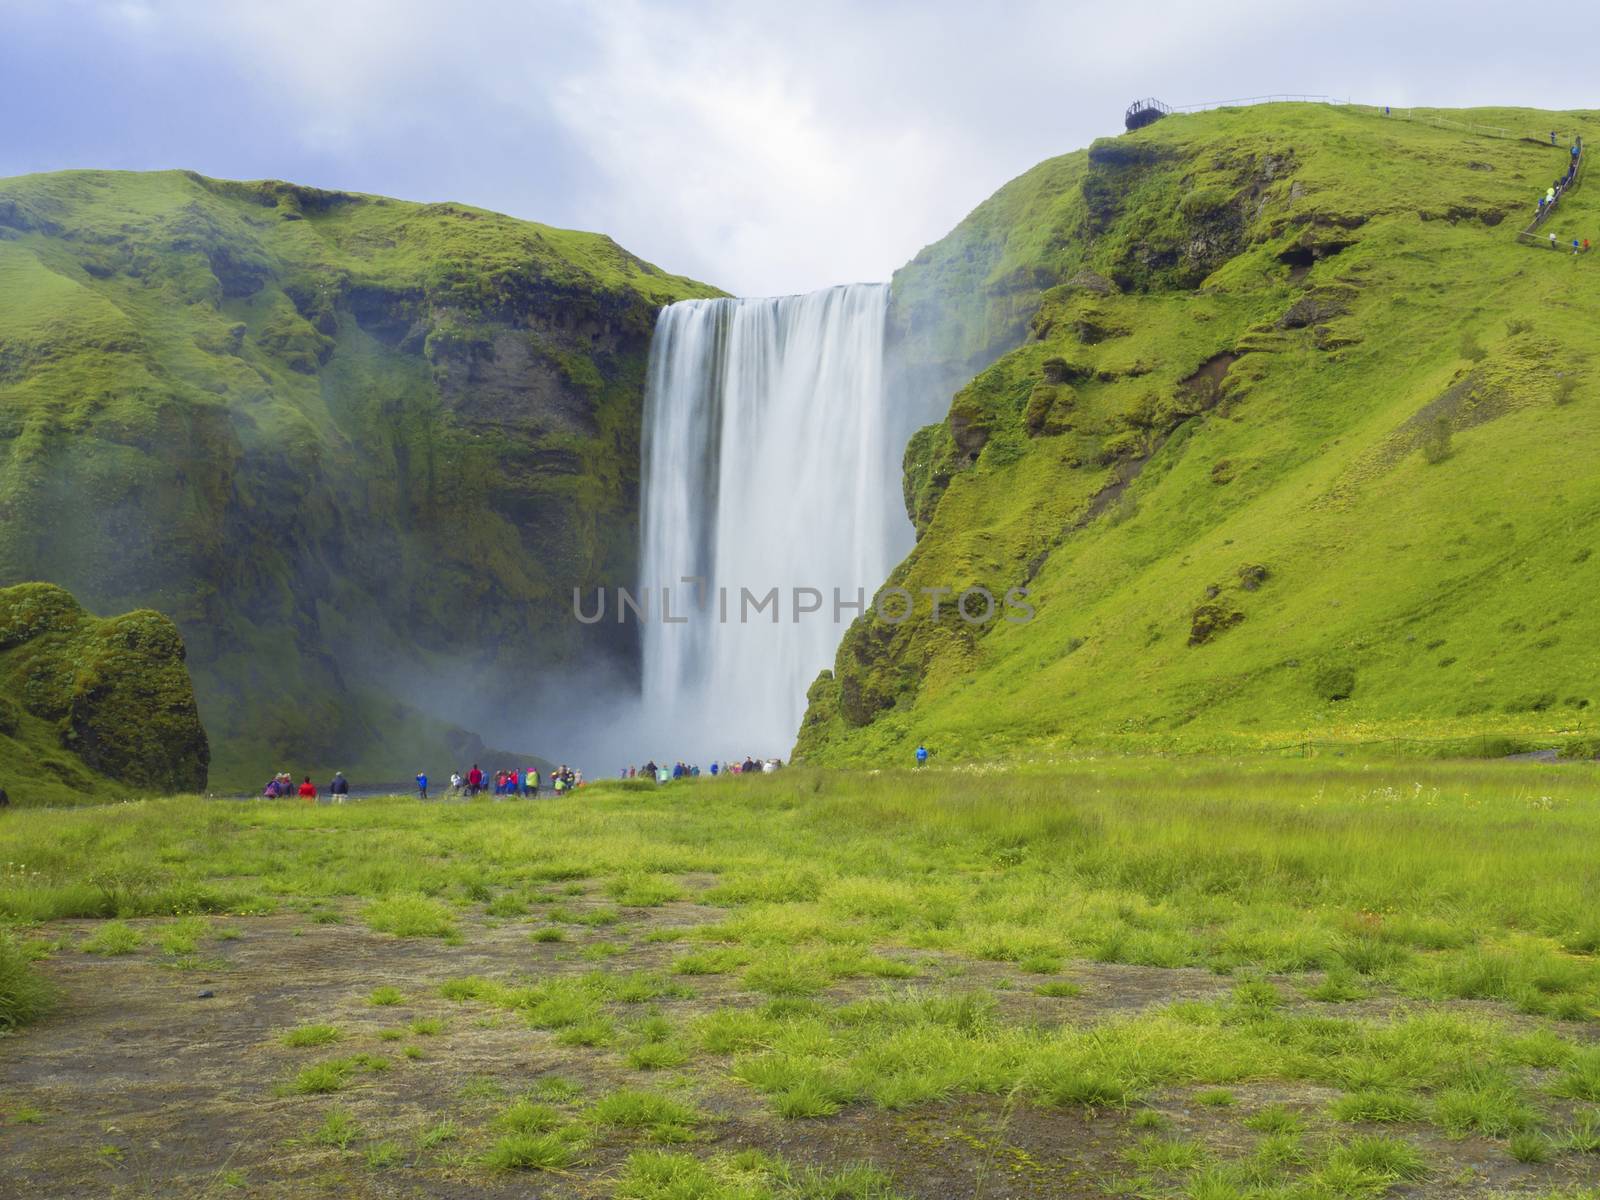 Beautiful Skogafoss waterfall in South Iceland Skogar with group of colorful dressed tourist people, long exposure motion blur, copy space by Henkeova